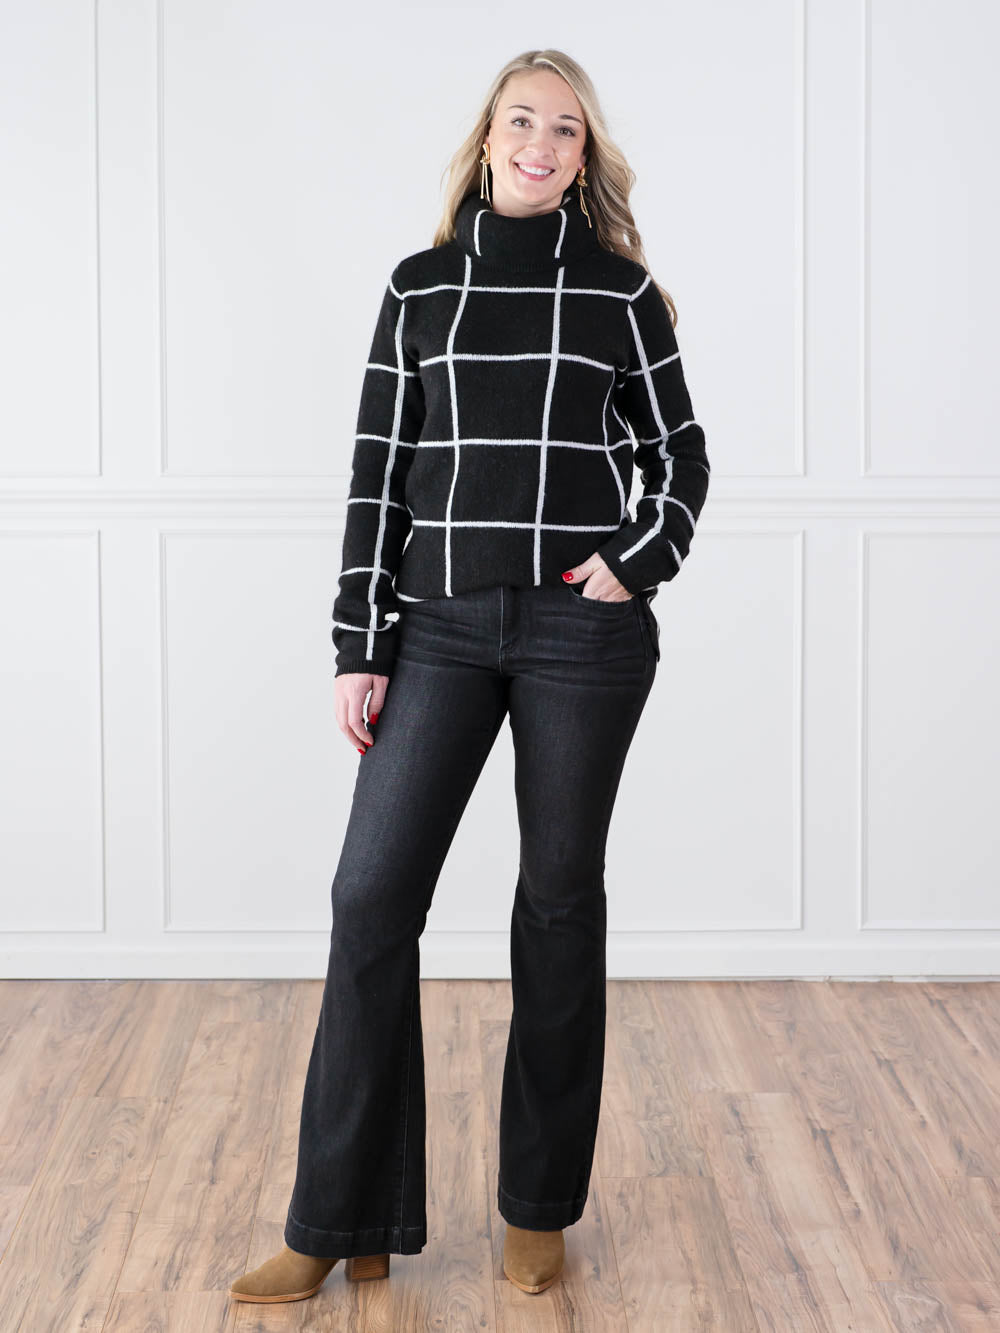 Windowpane Plaid Sweater for Tall Women Outfit